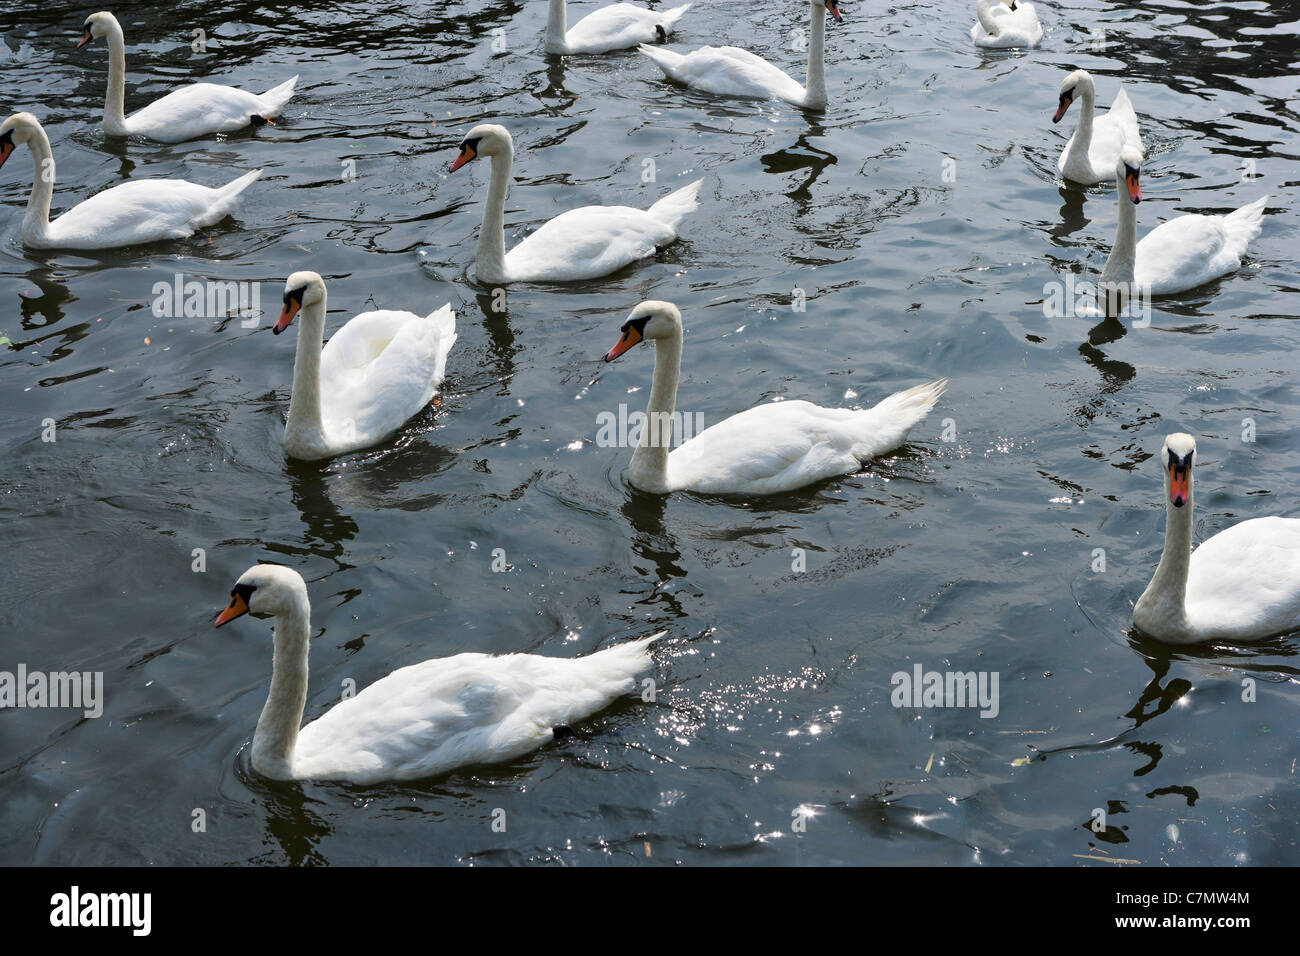 White swans on the River Stour at Town Quay, Christchurch, Dorset, England, UK Stock Photo